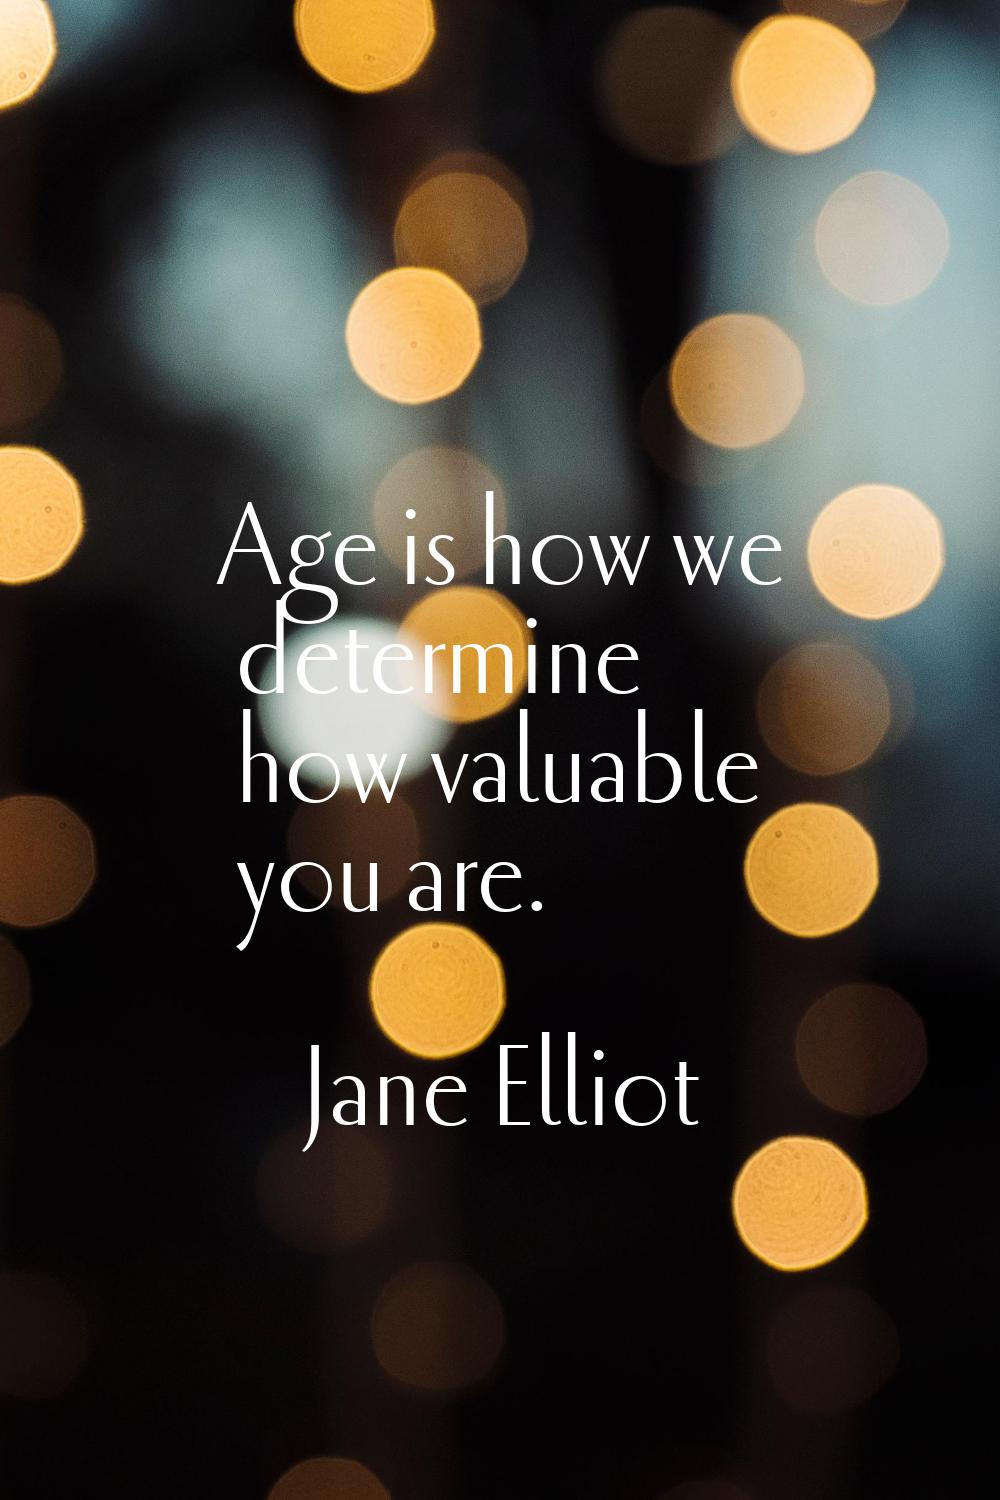 Age is how we determine how valuable you are.